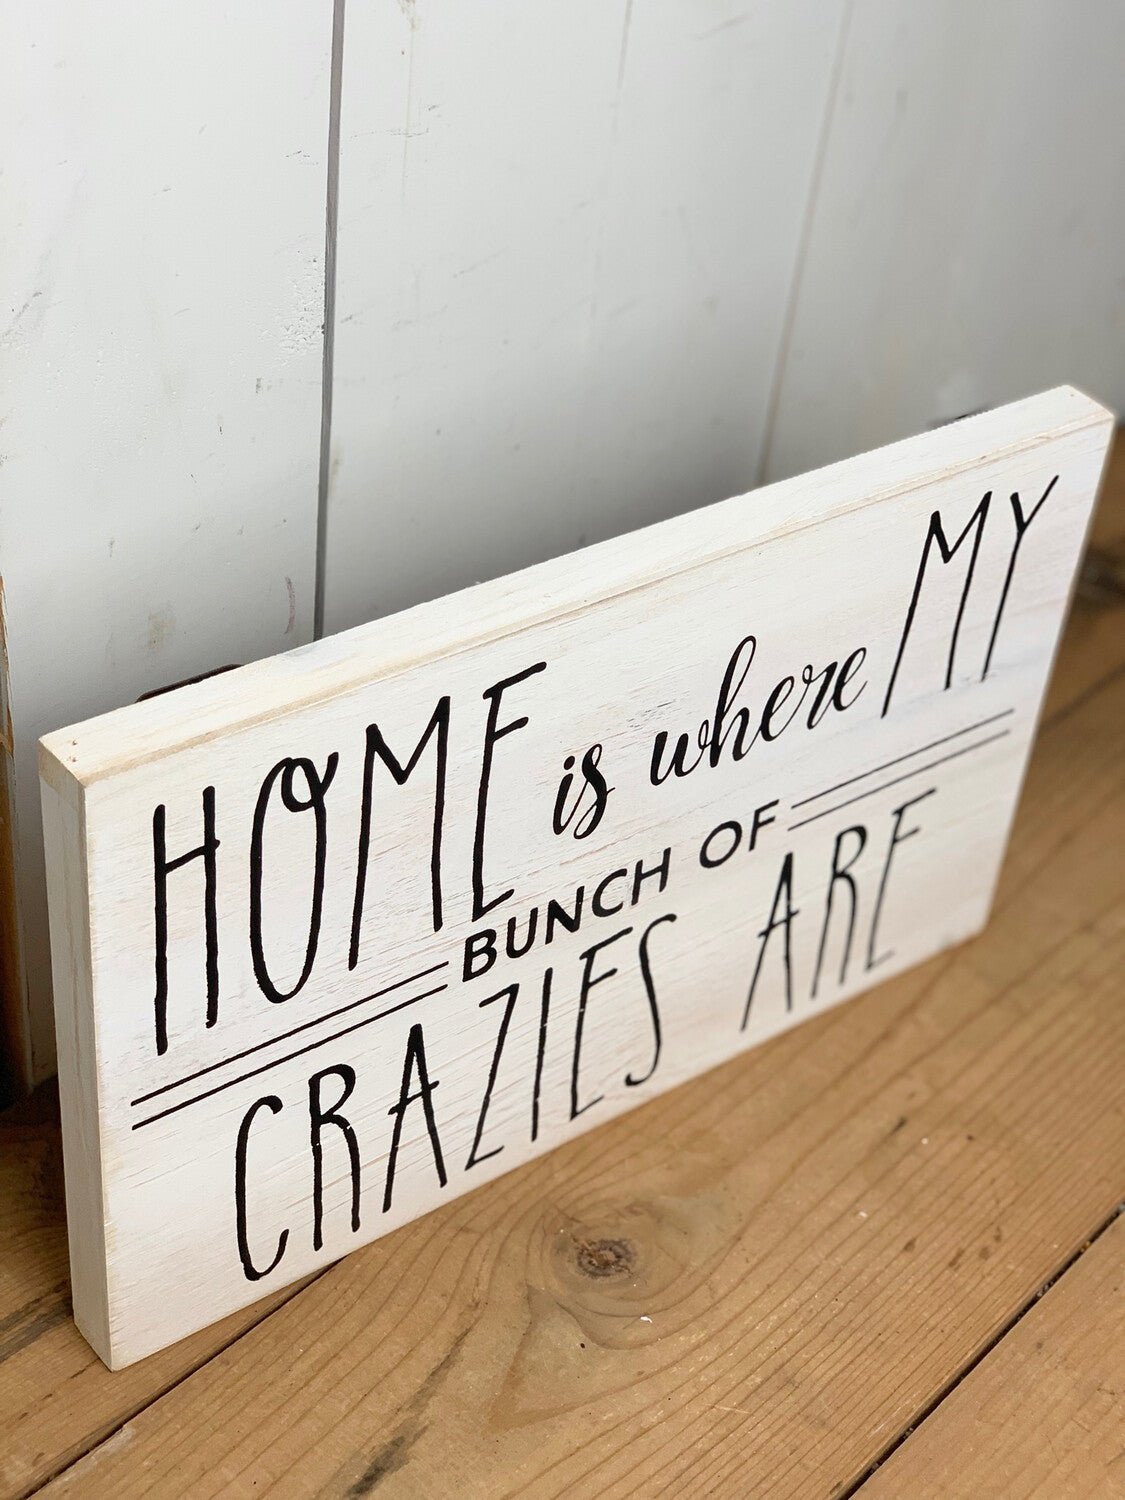 “Home is Where My Bunch of Crazies Are” Signage